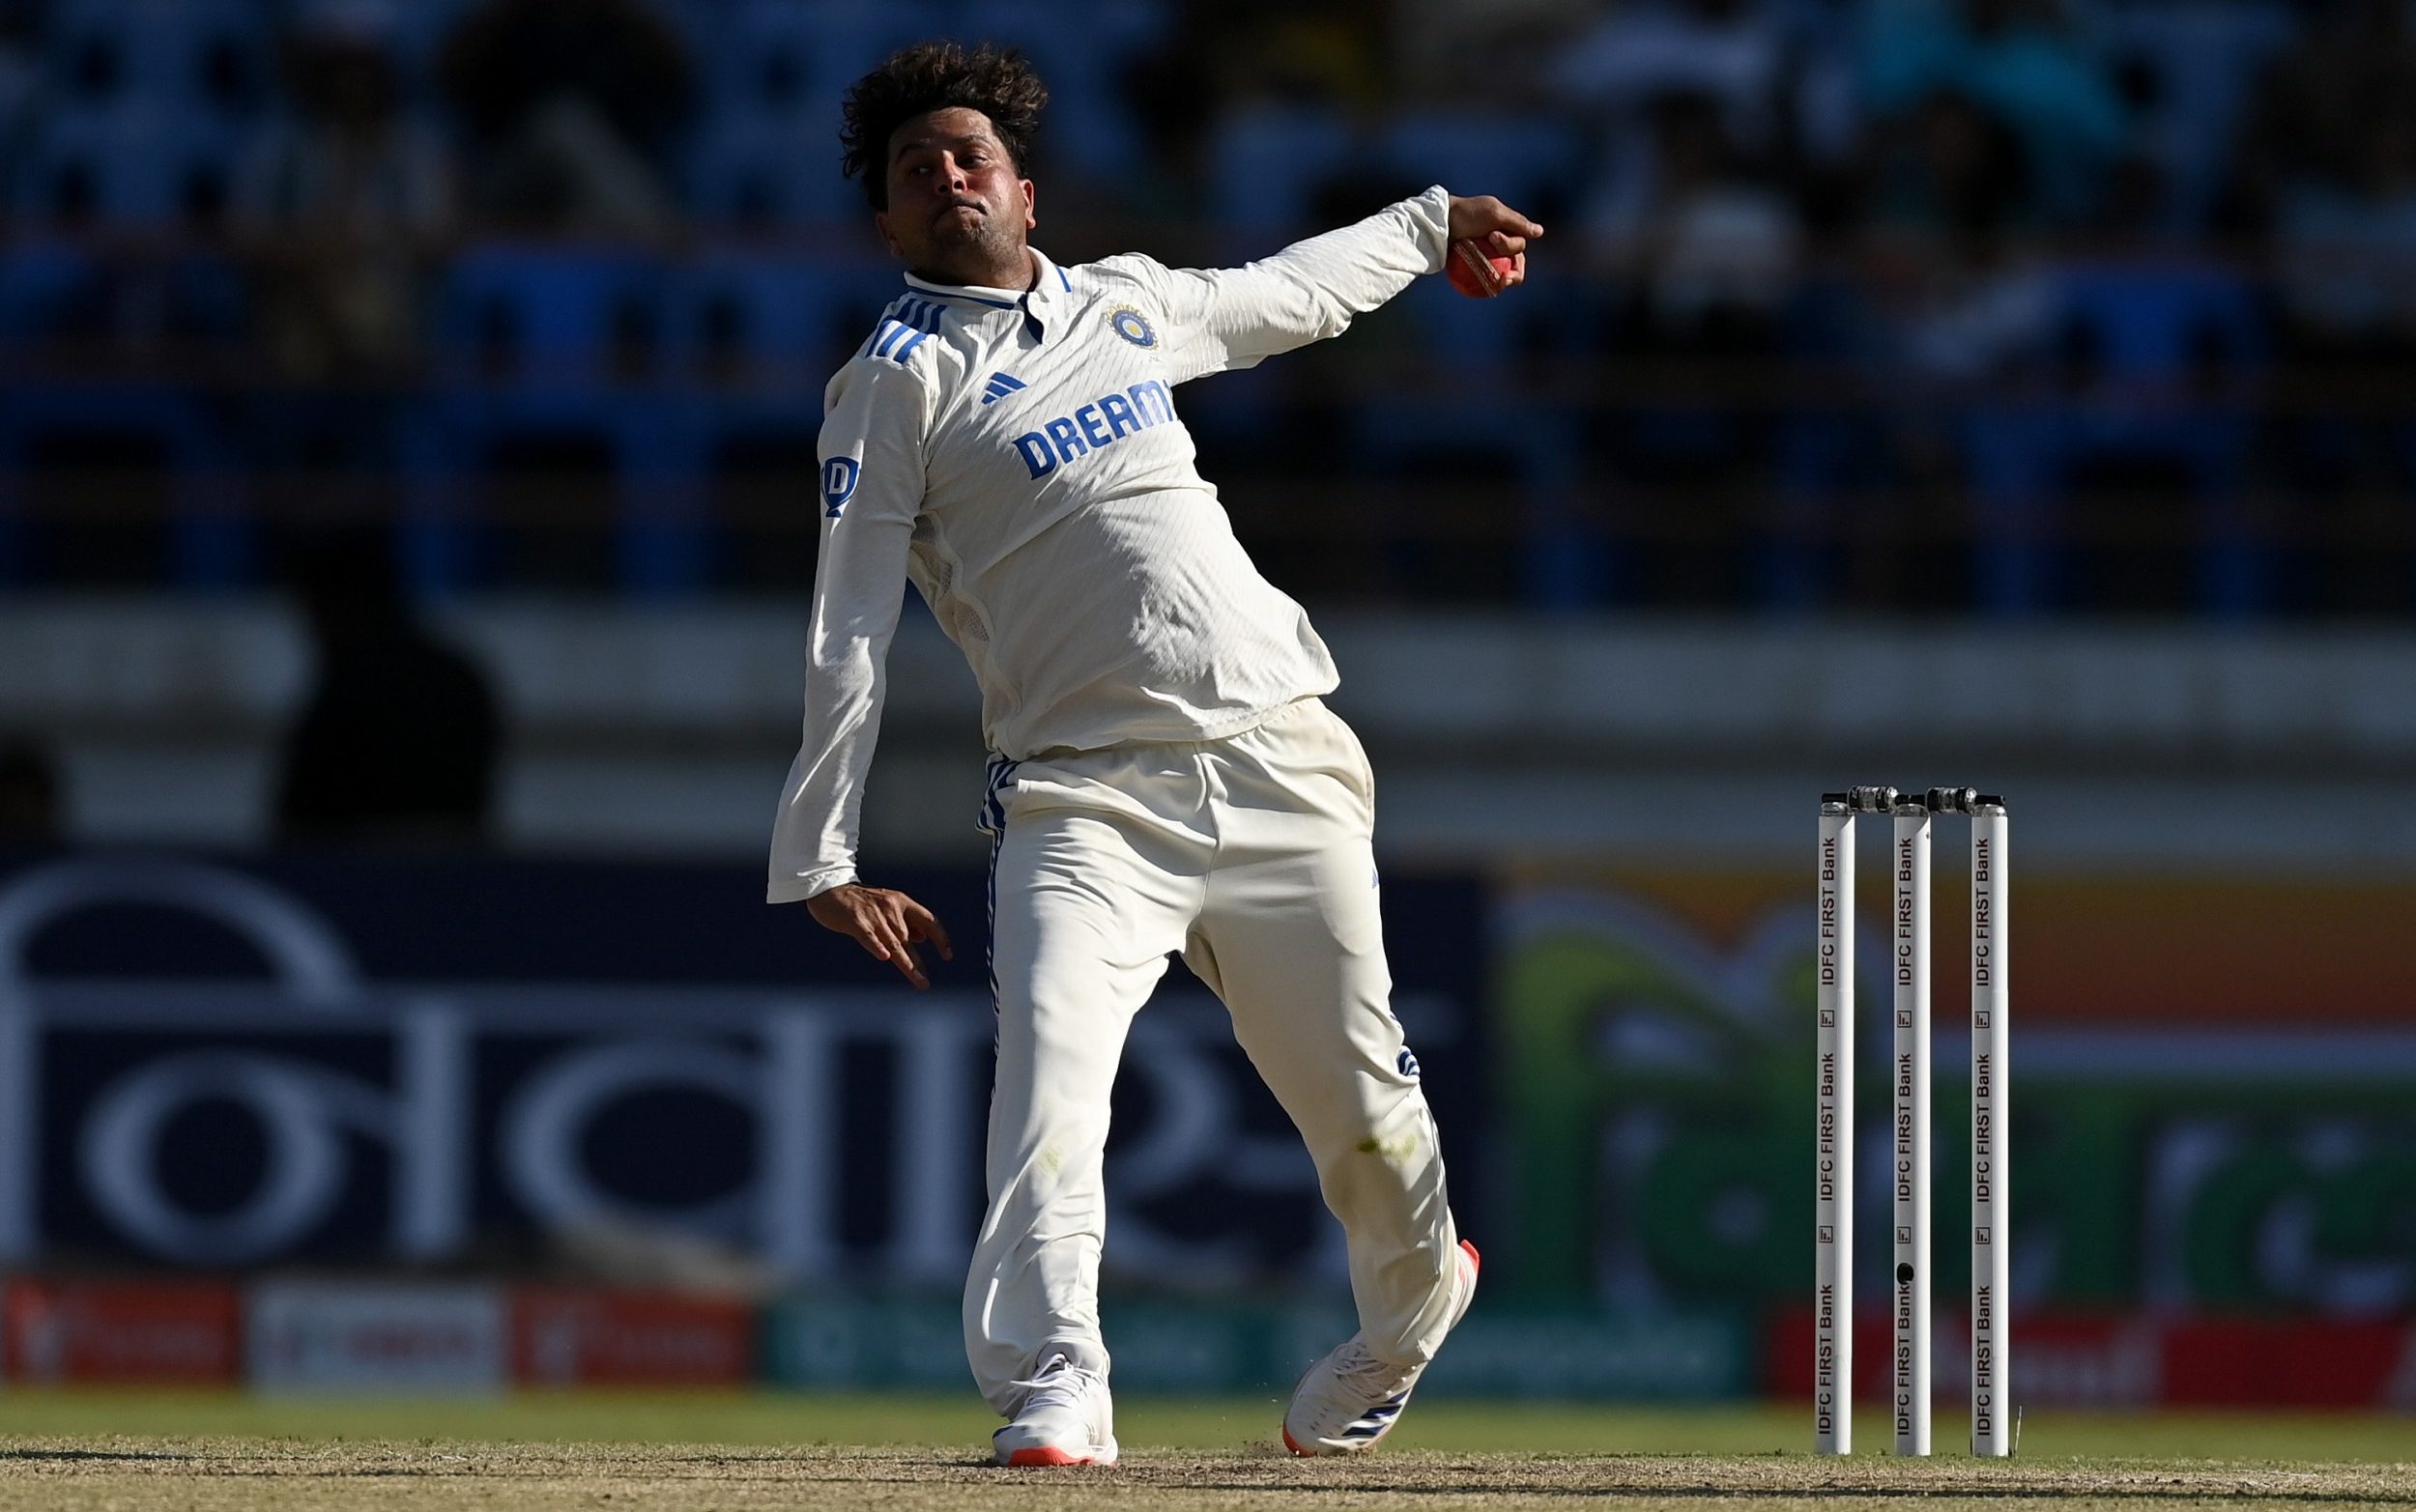 kuldeep yadav's left-arm wrist spin is a rare skill – but it will not be for much longer